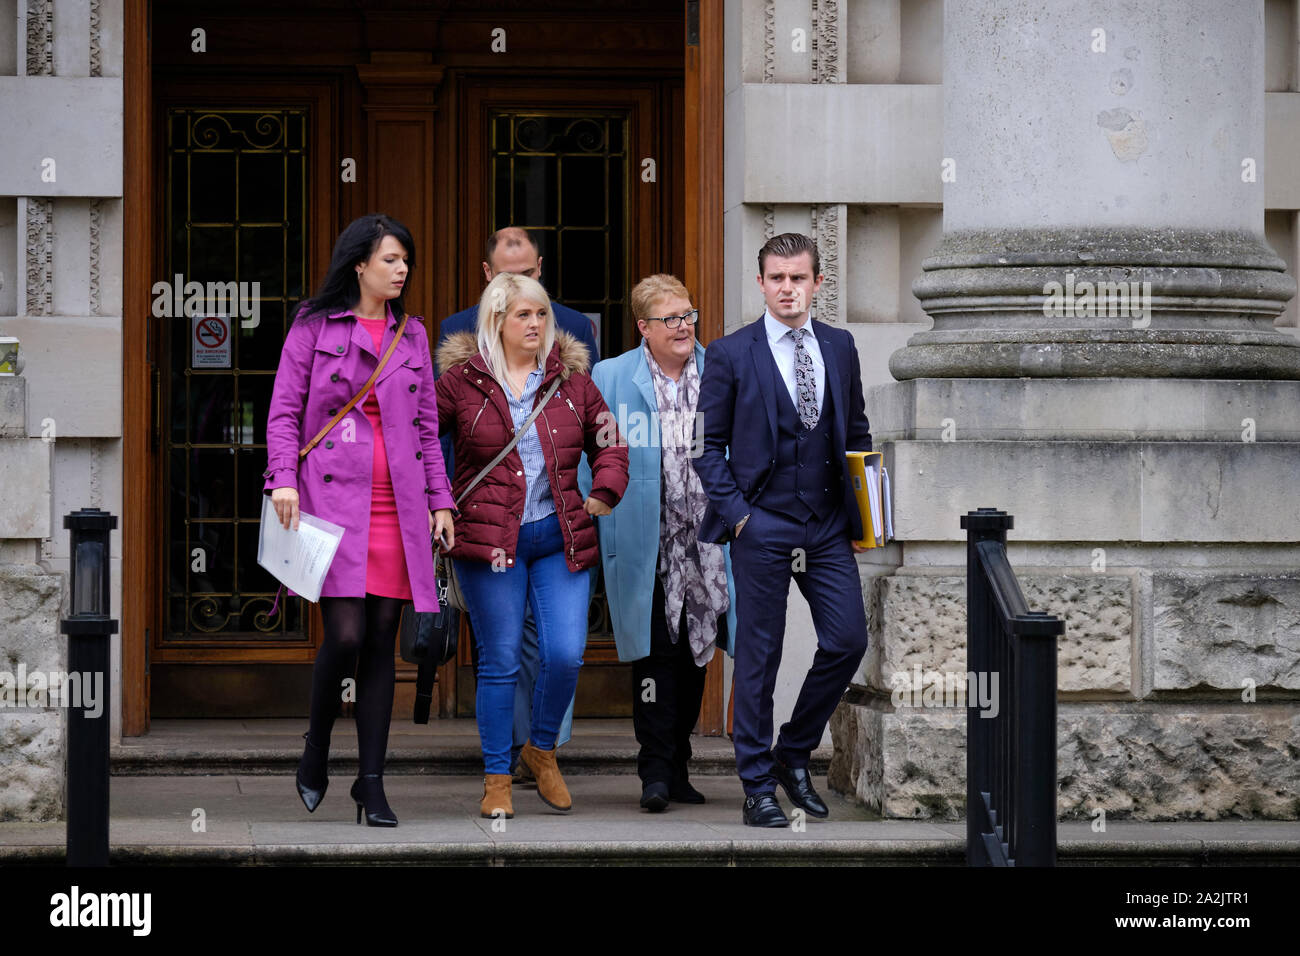 Belfast, Northern Ireland, UK. 3rd October, 2019.  Sarah Ewart (burgundy), her mother Jane Christie (light blue) and Grainne Teggart of Amnesty International (mauve) and legal team leaving Belfast the Belfast High Court following ruling. Today the High Court delivered a judgment in favour of Ms.Ewart that the Northern Ireland’s abortion laws were in breach of  UK’s human rights commitments.   Credit: JF Pelletier/Alamy Live News. Stock Photo